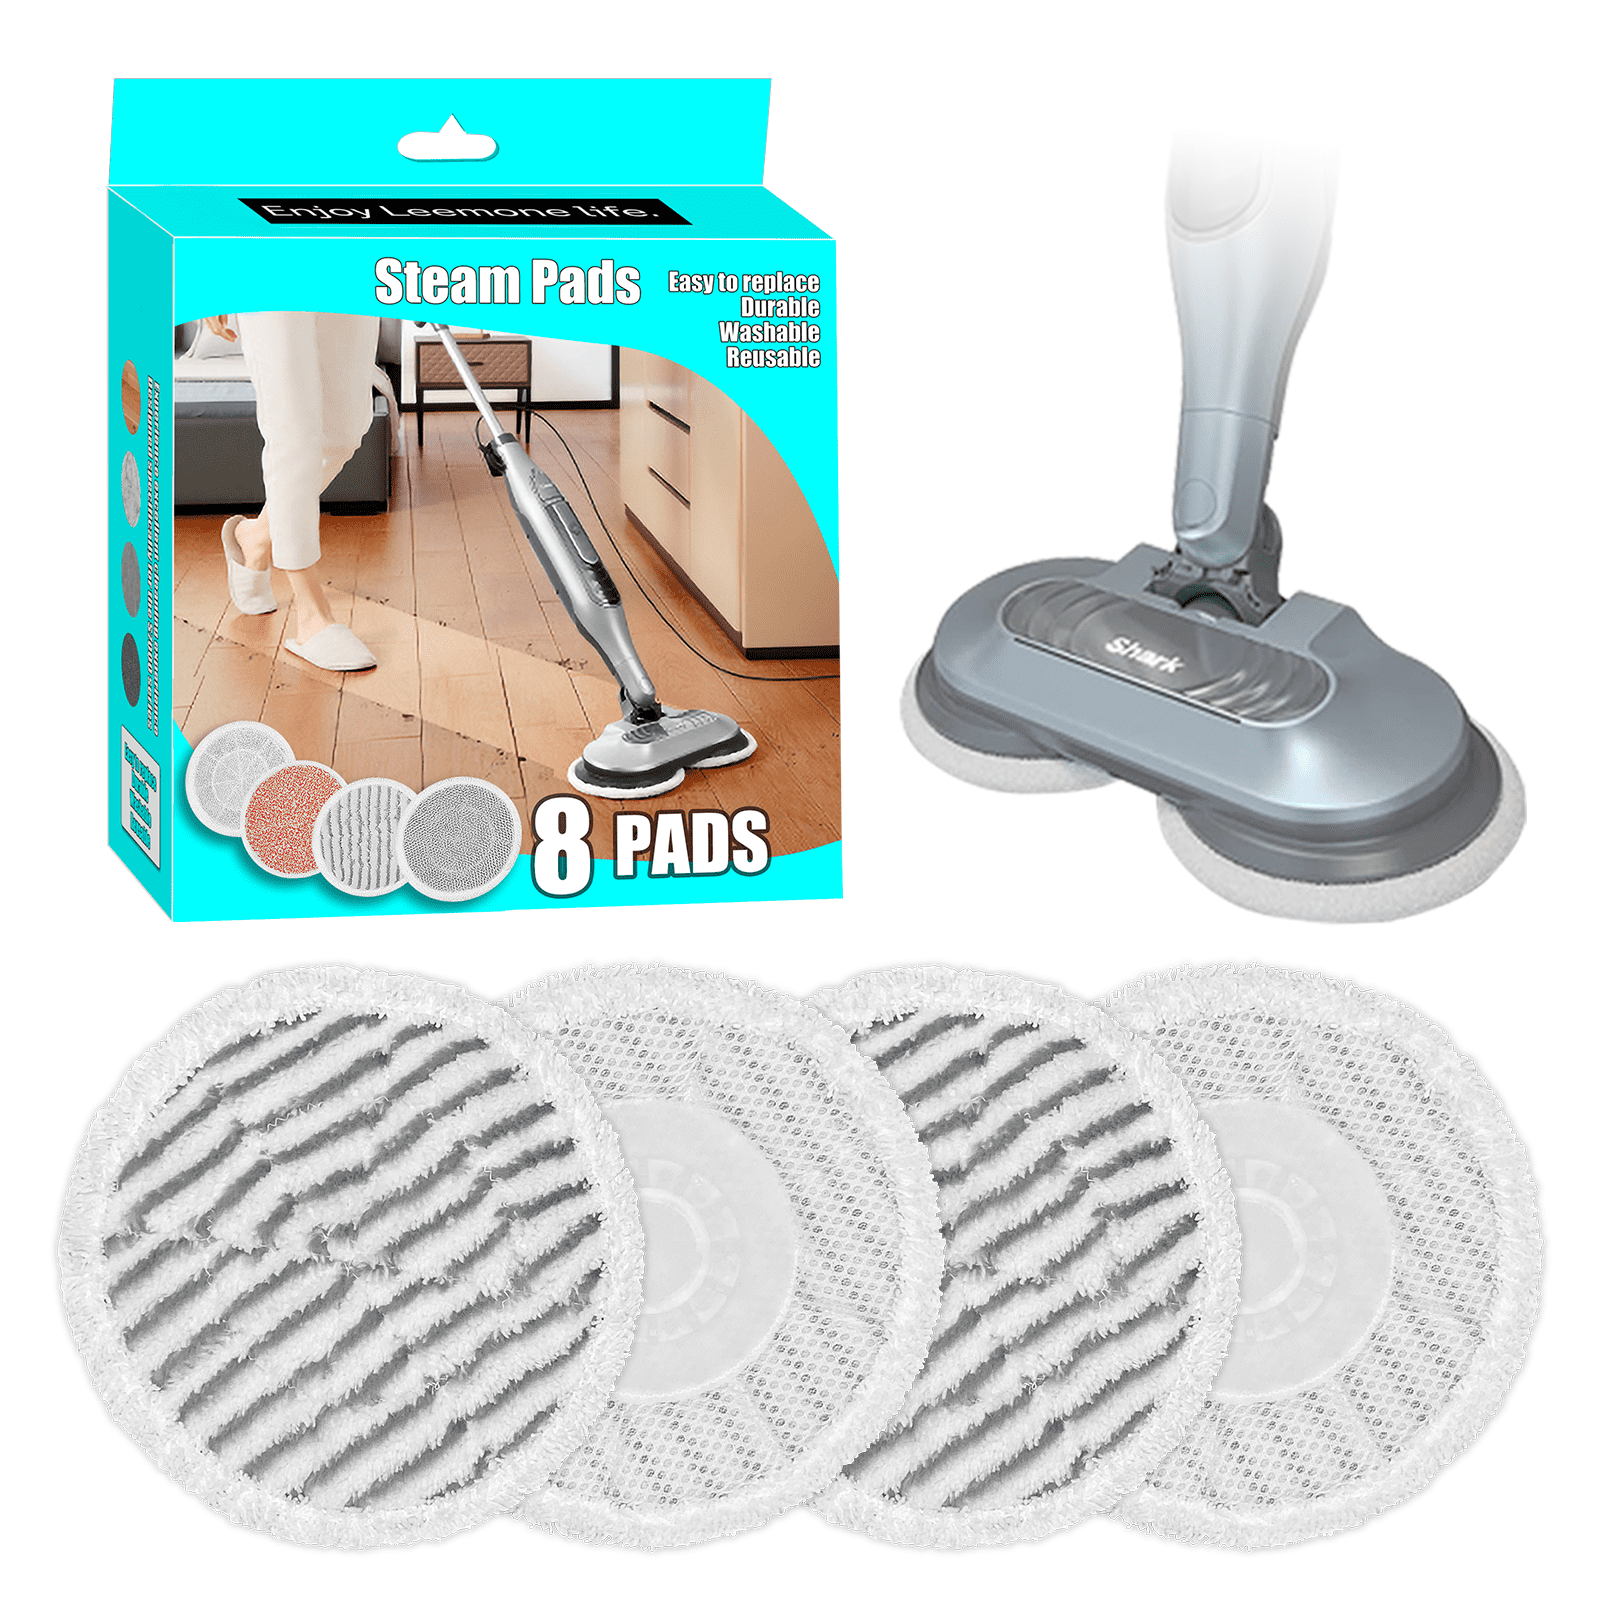 Steam Wand Cleaning Tool Replacement Pads Online